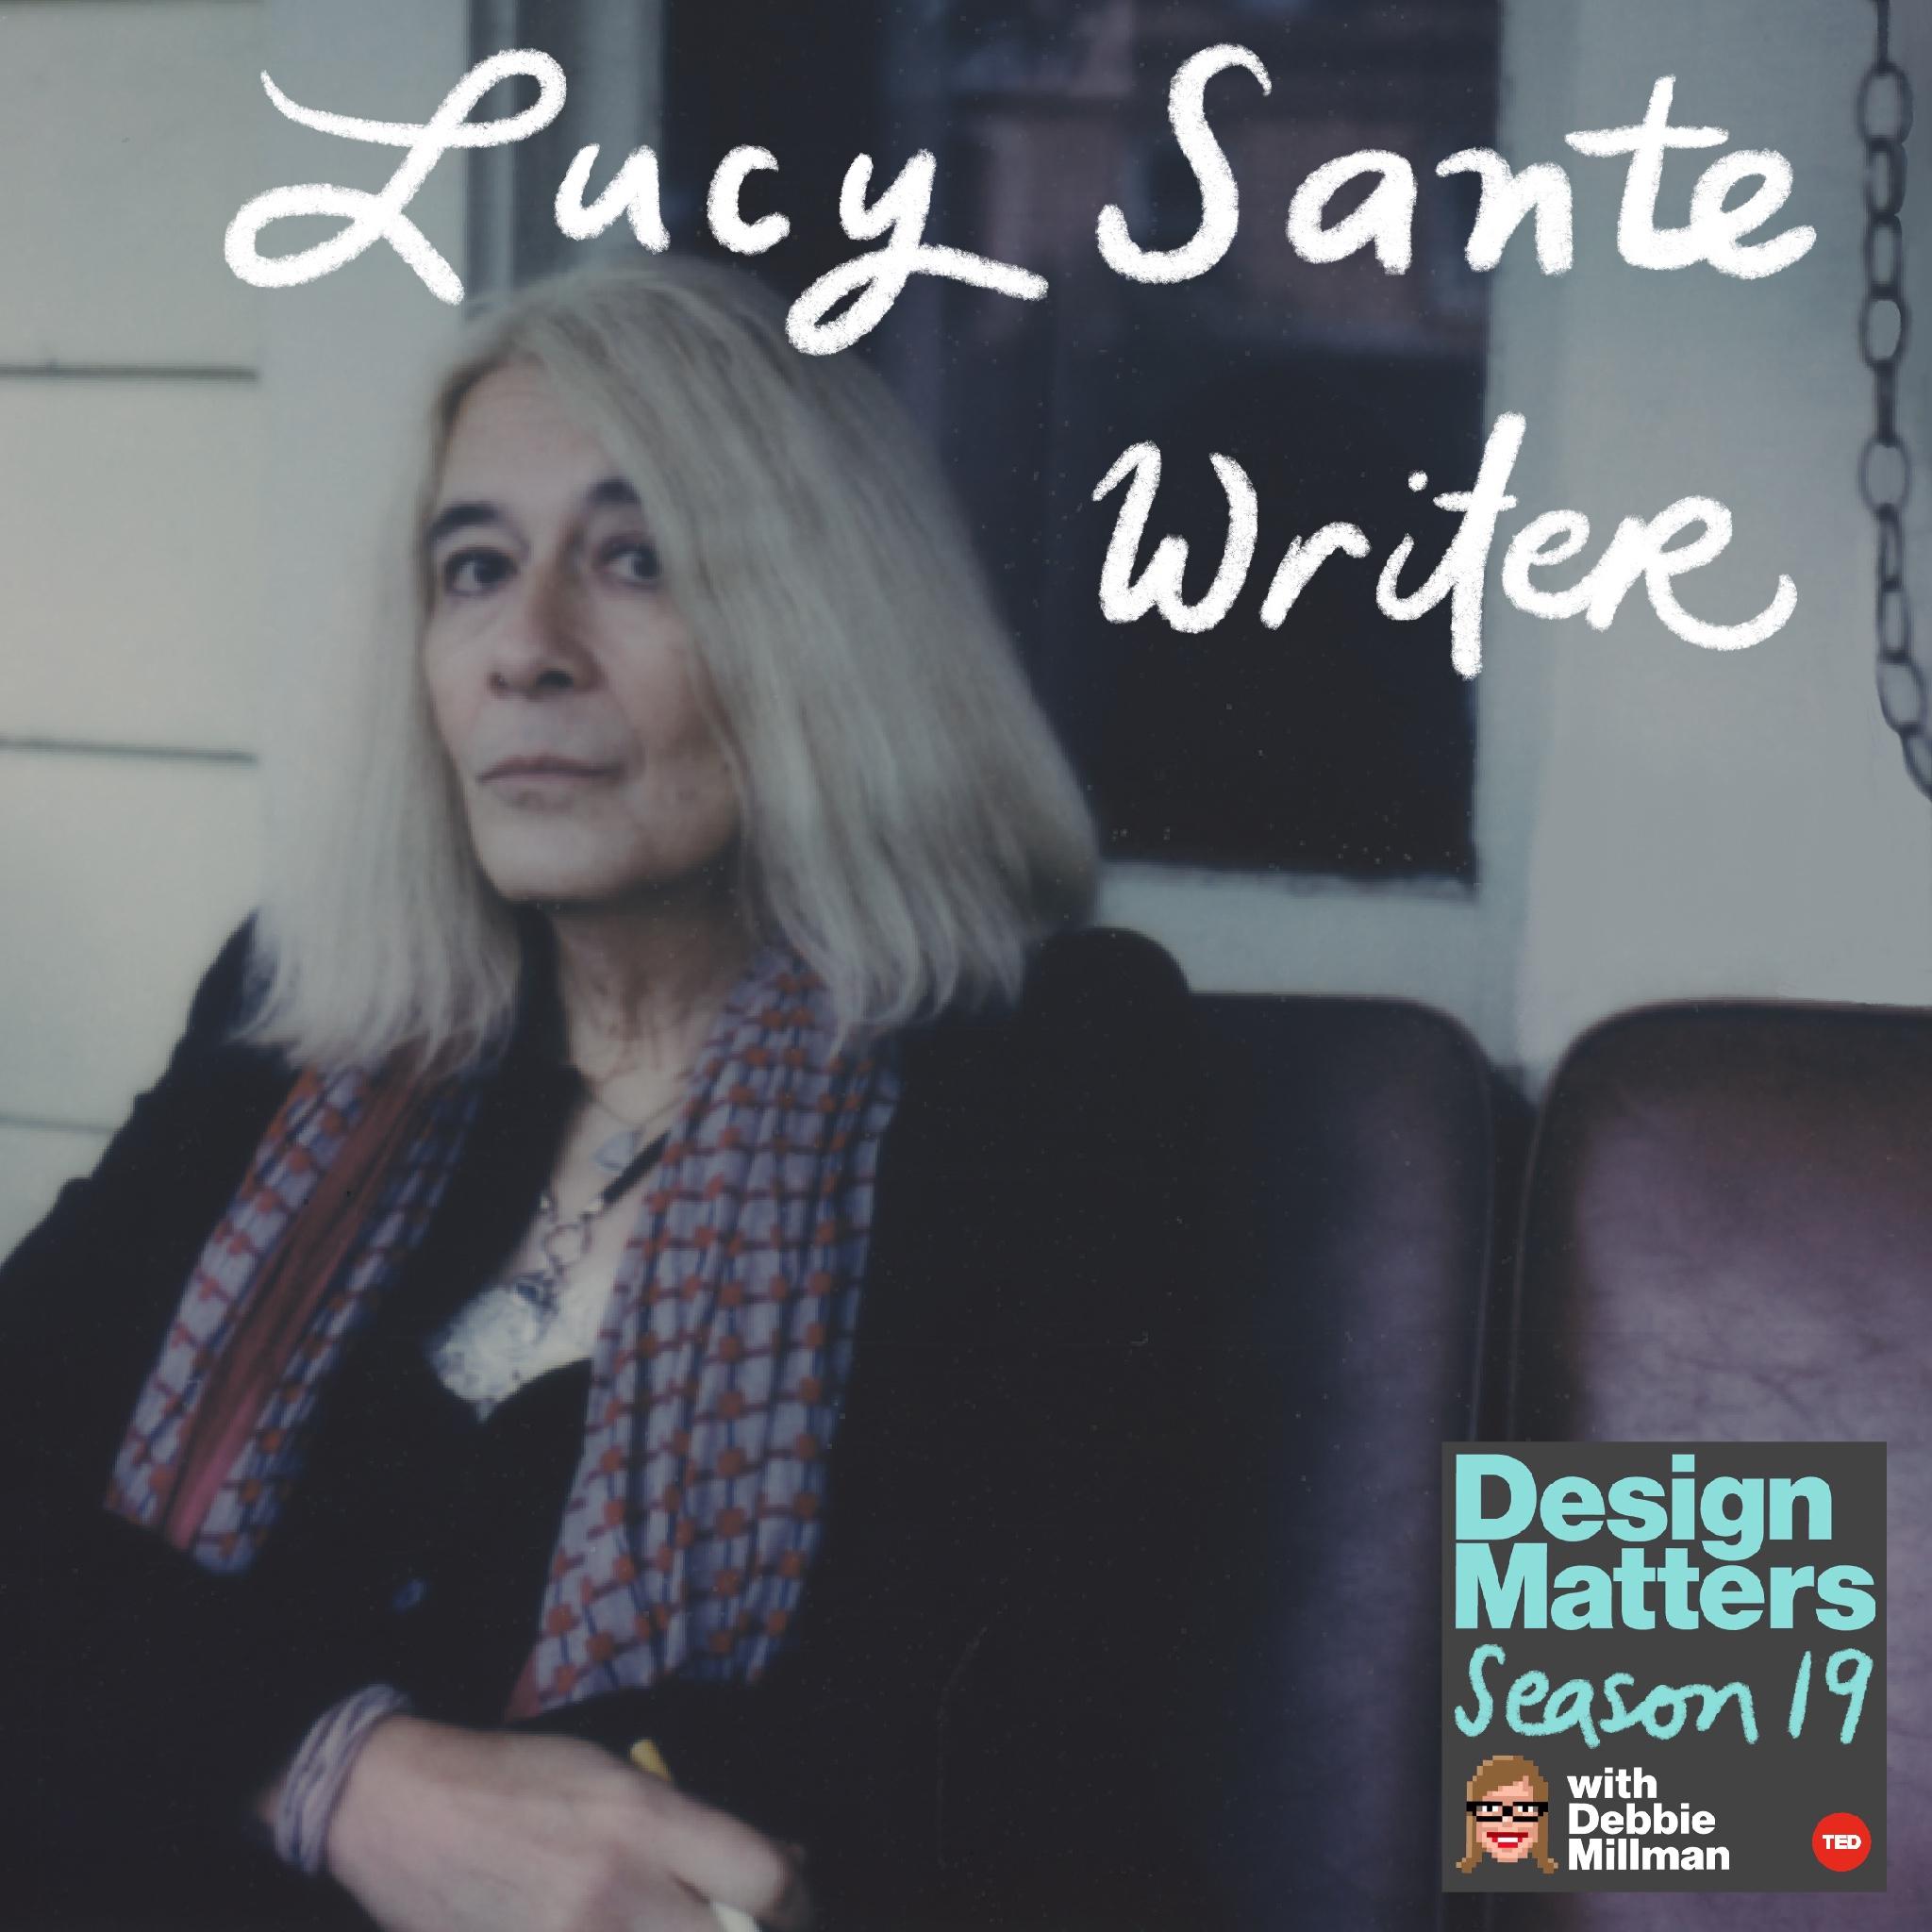 Thumbnail for "Lucy Sante".